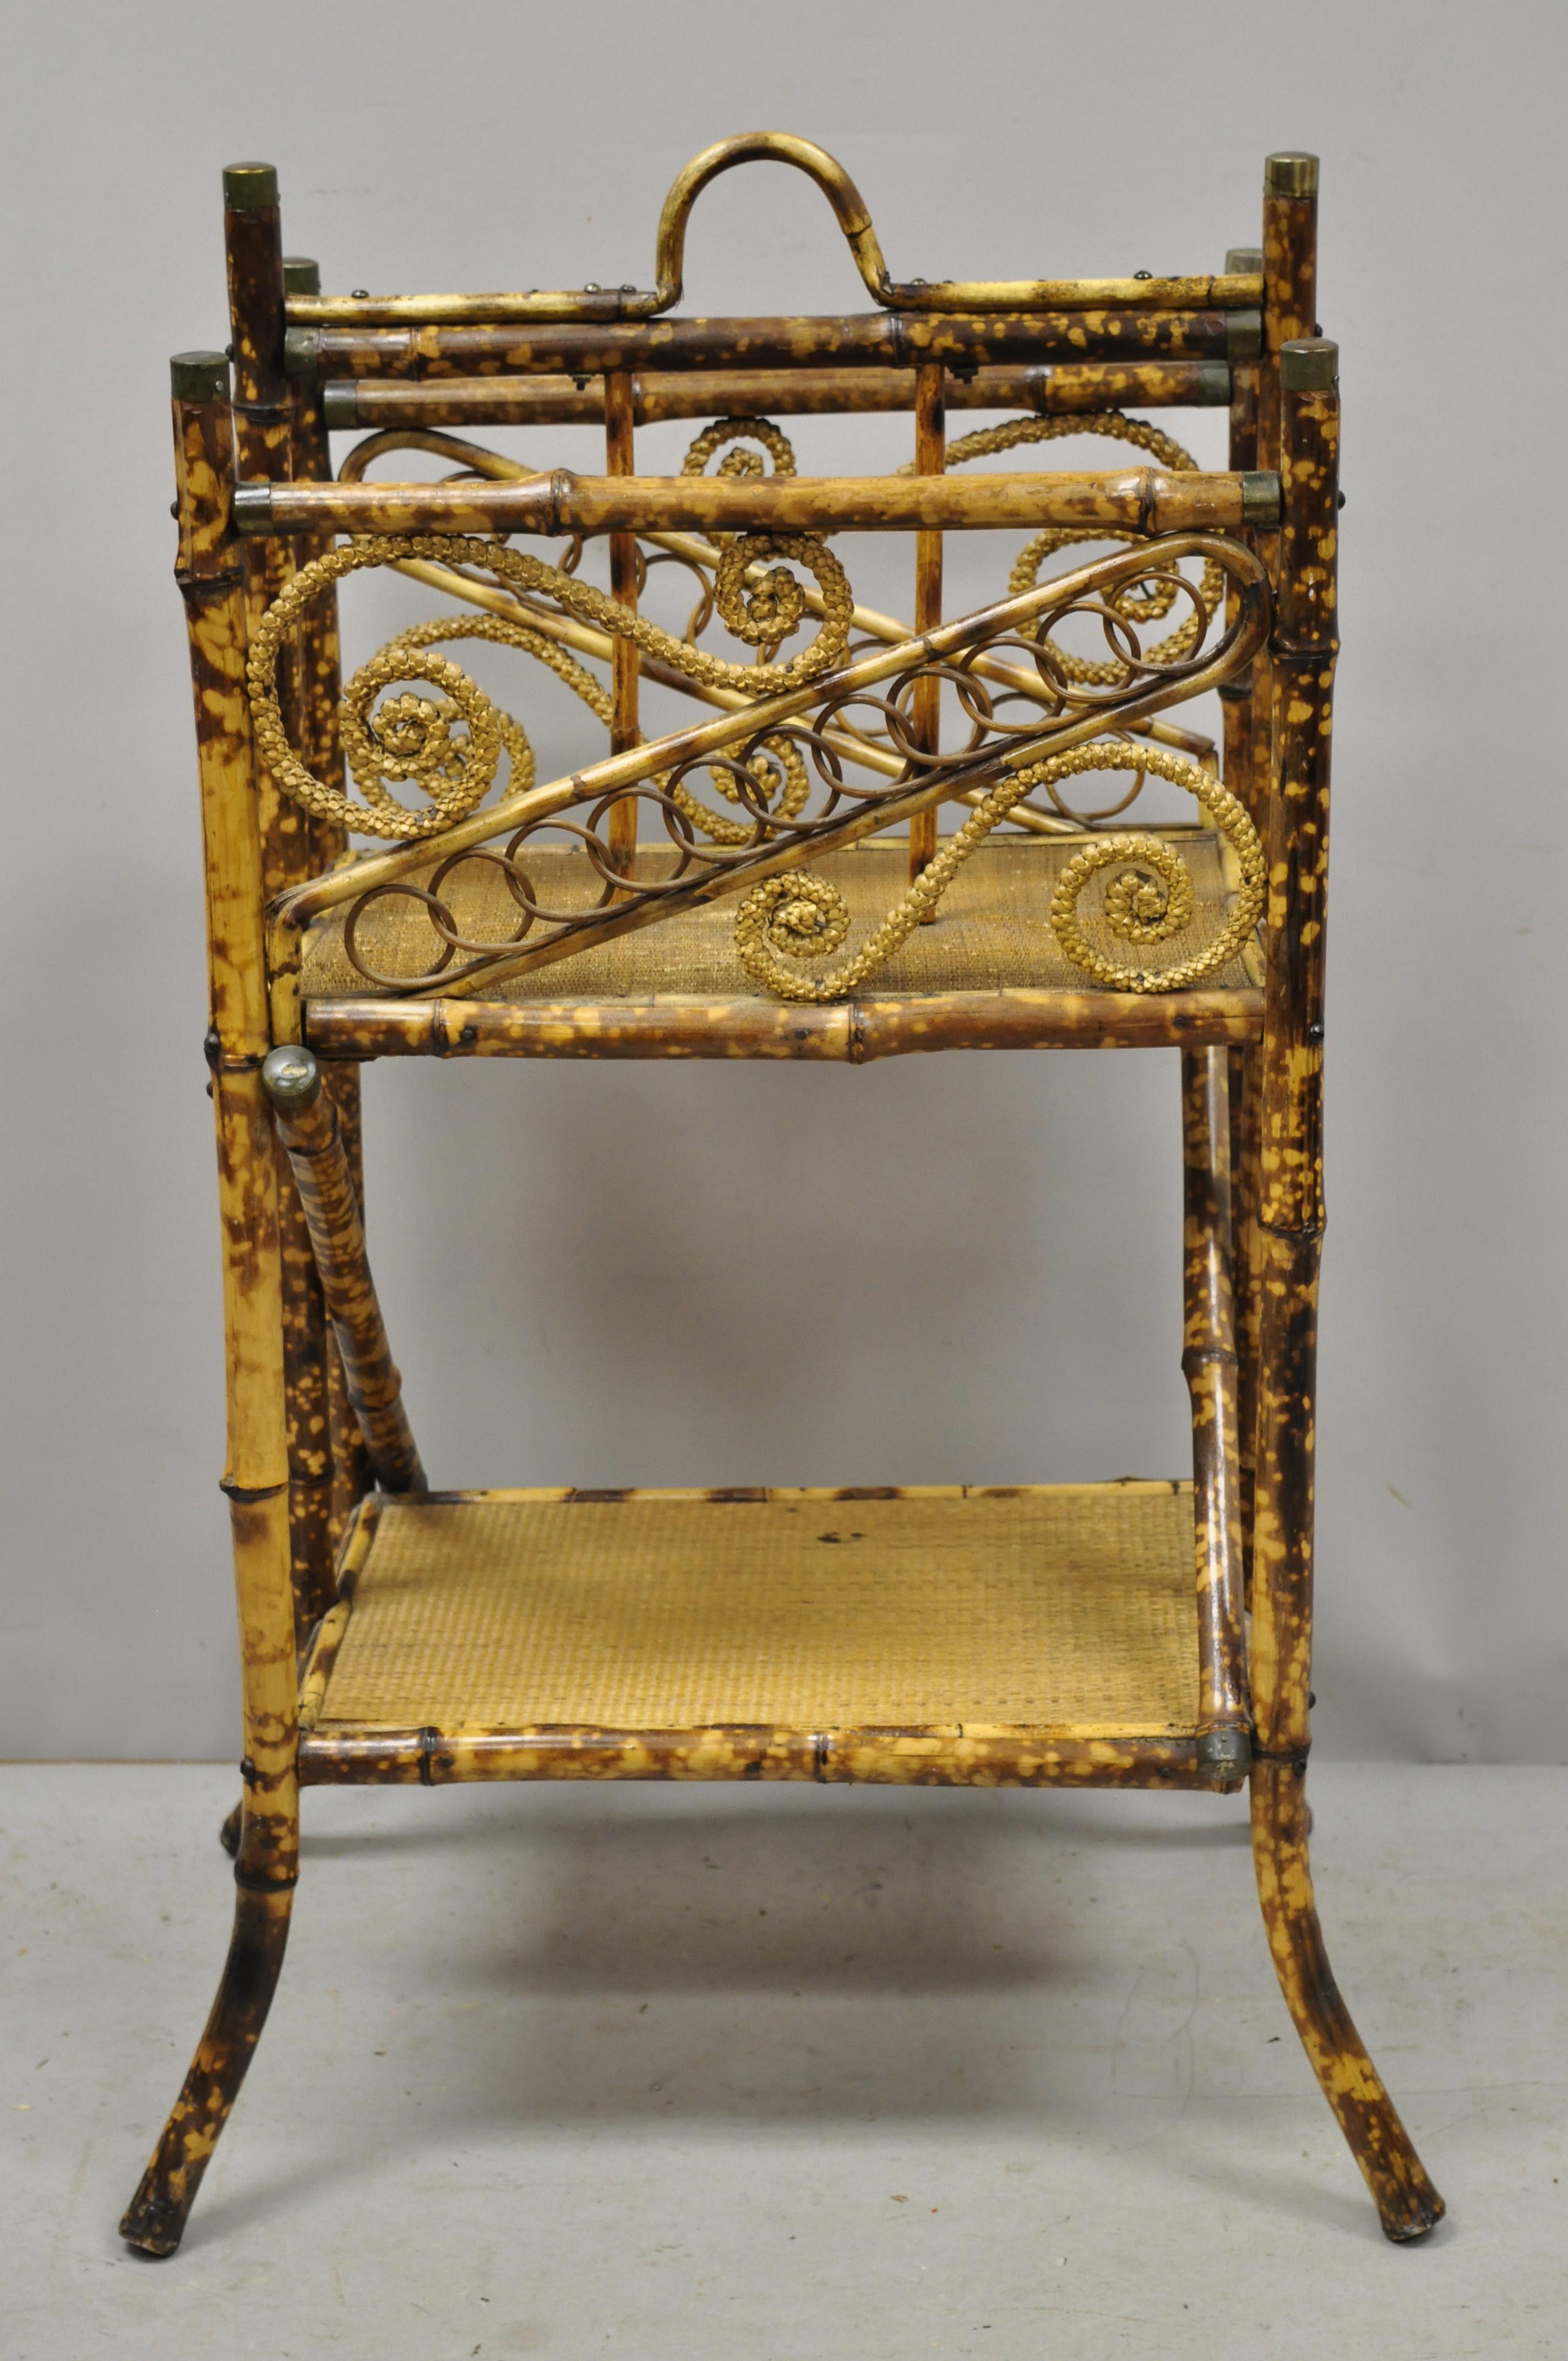 Antique English Victorian charred burnt bamboo magazine rack stand shelf. Item features ornate bent bamboo scrollwork, lower shelf, brass accents, very rare model, very nice antique item, circa early 20th century. Measurements: 37.5